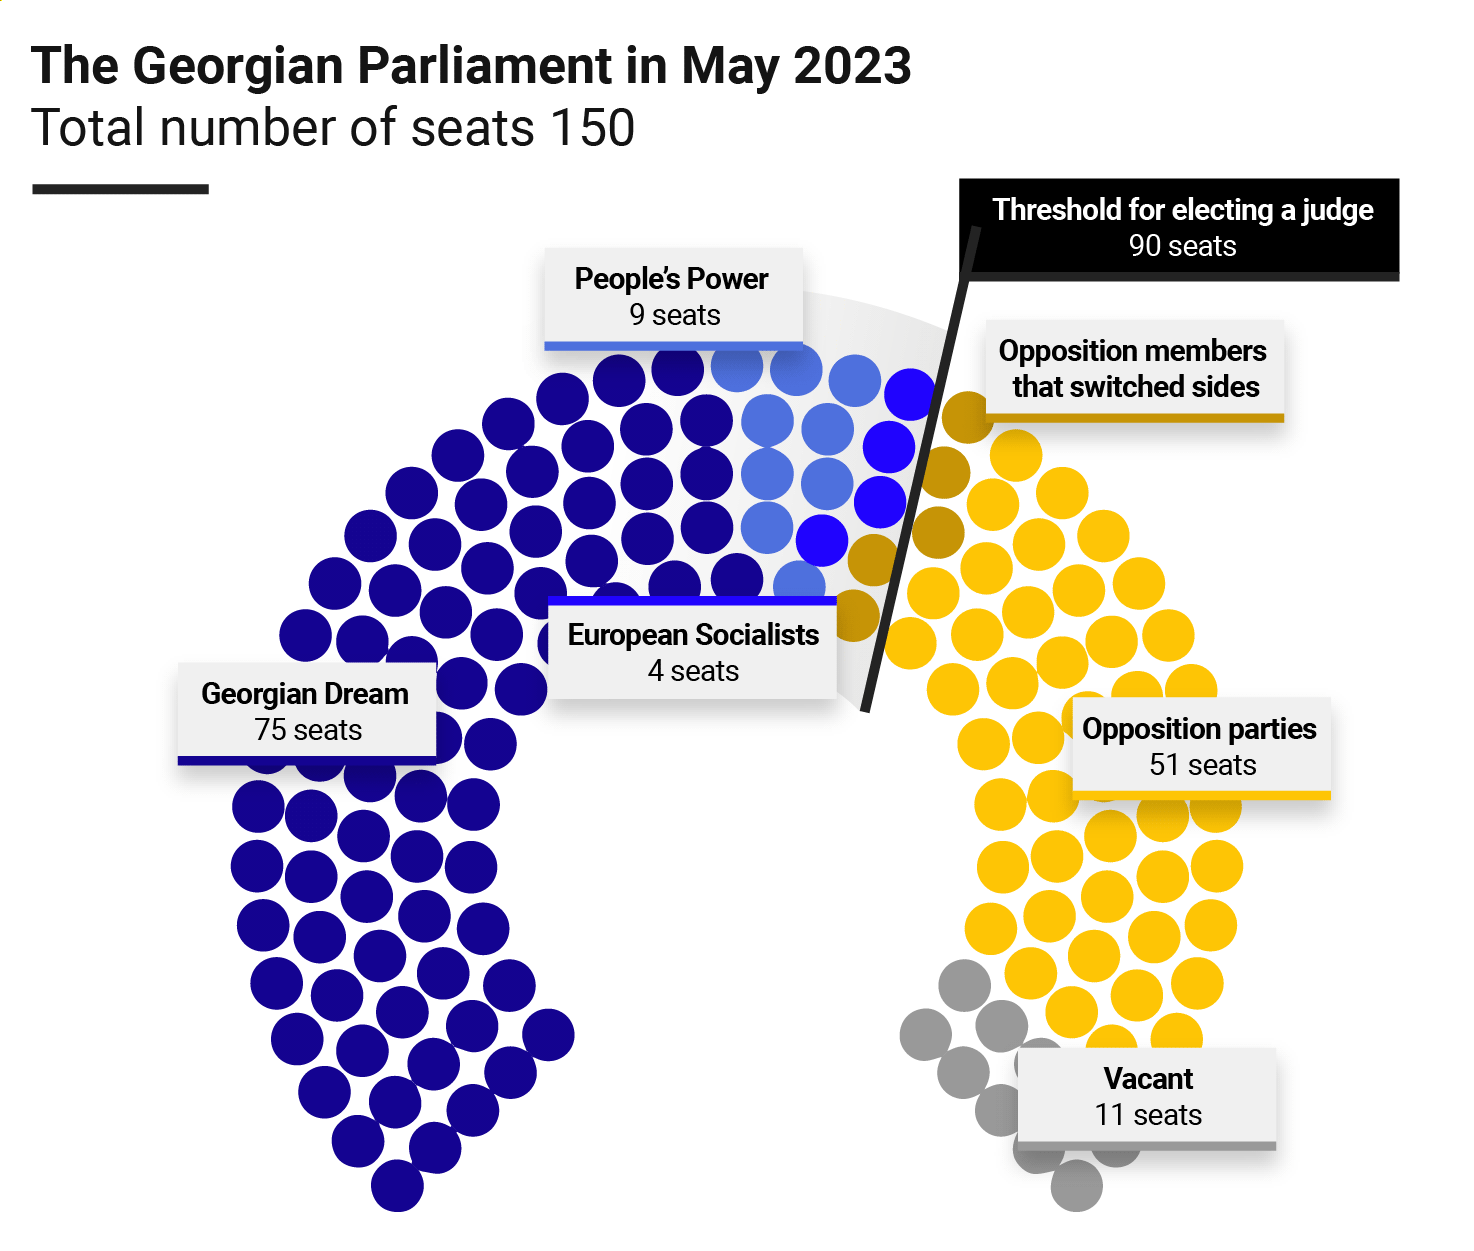 An infographic showing the seats of the Georgian Parliament in May 2023 eiqxixkiqqdinv